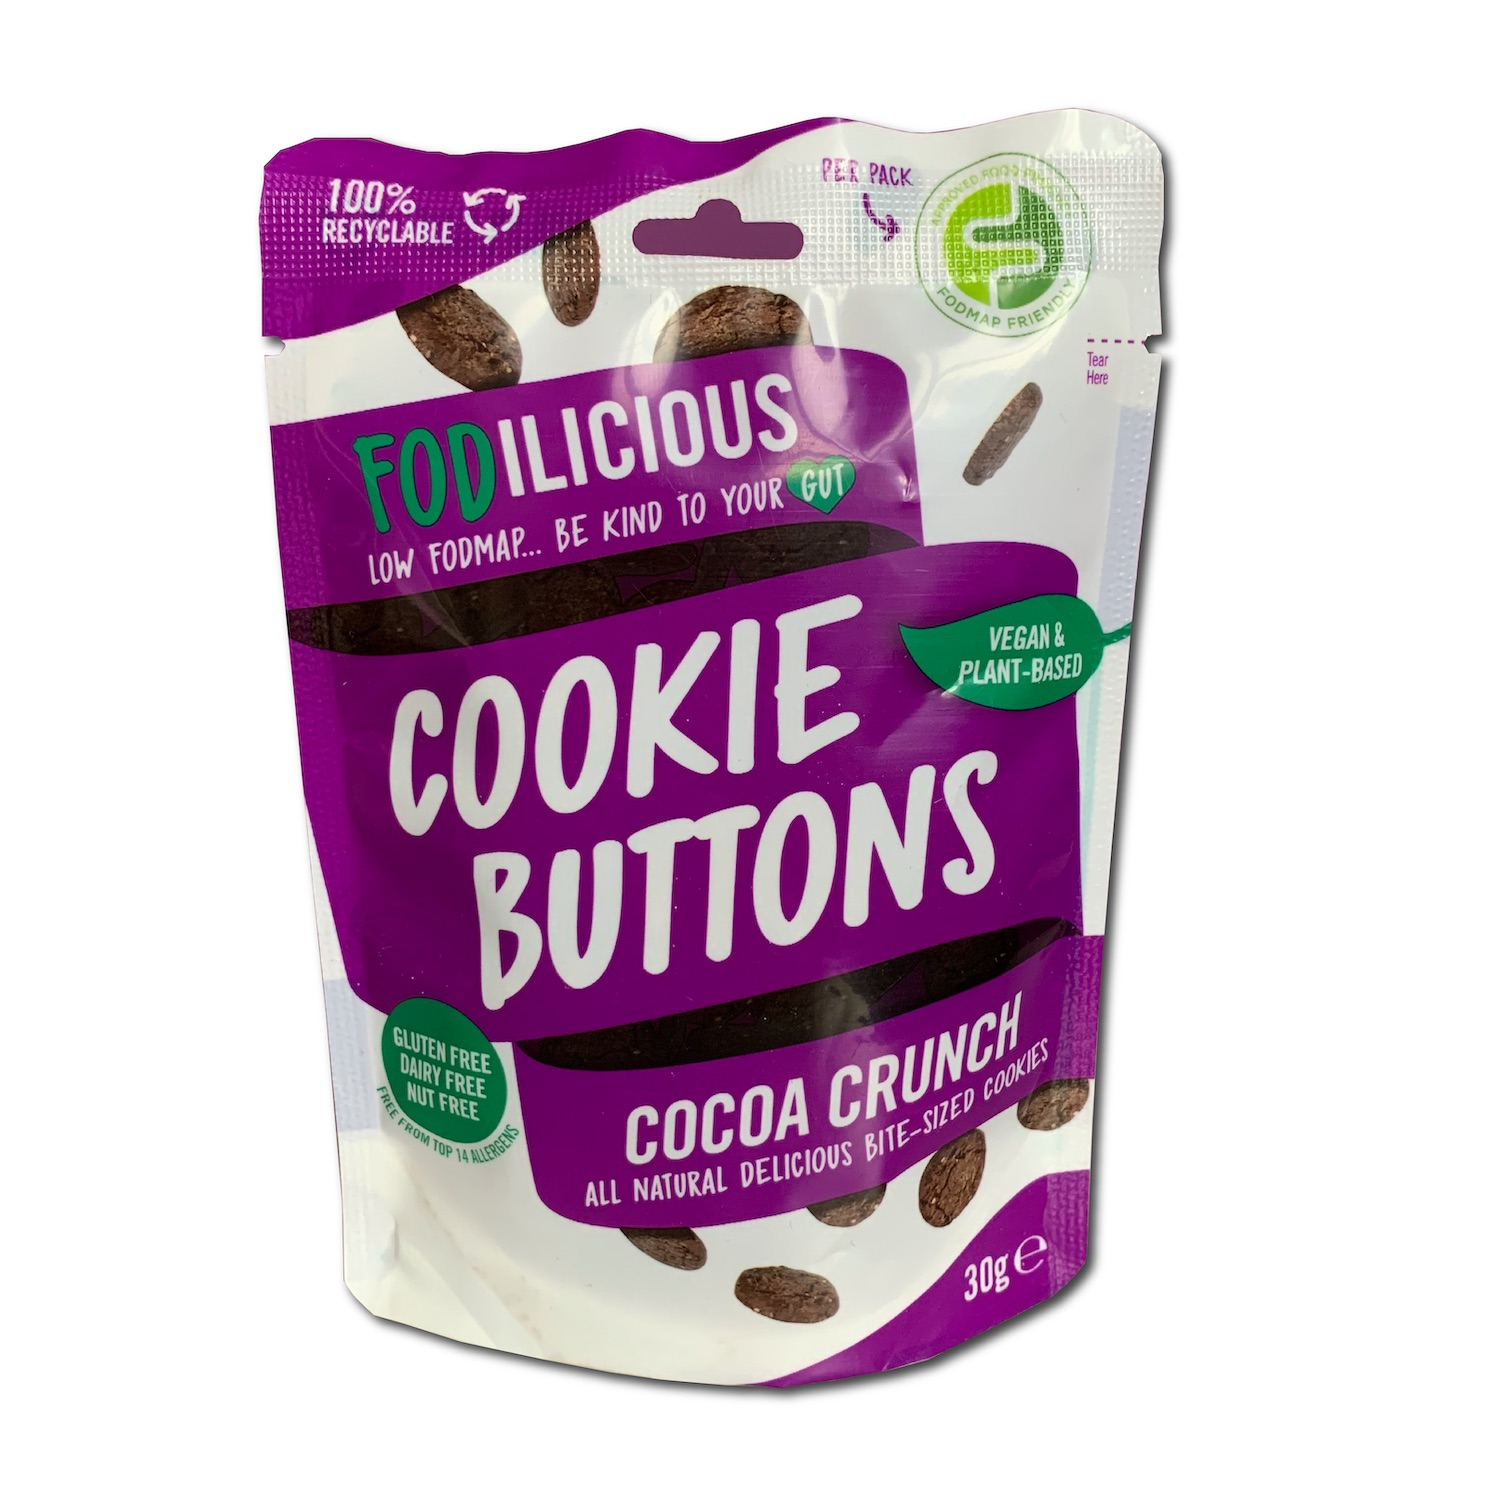 Fodilicious Cookie Buttons Cocoa Crunch